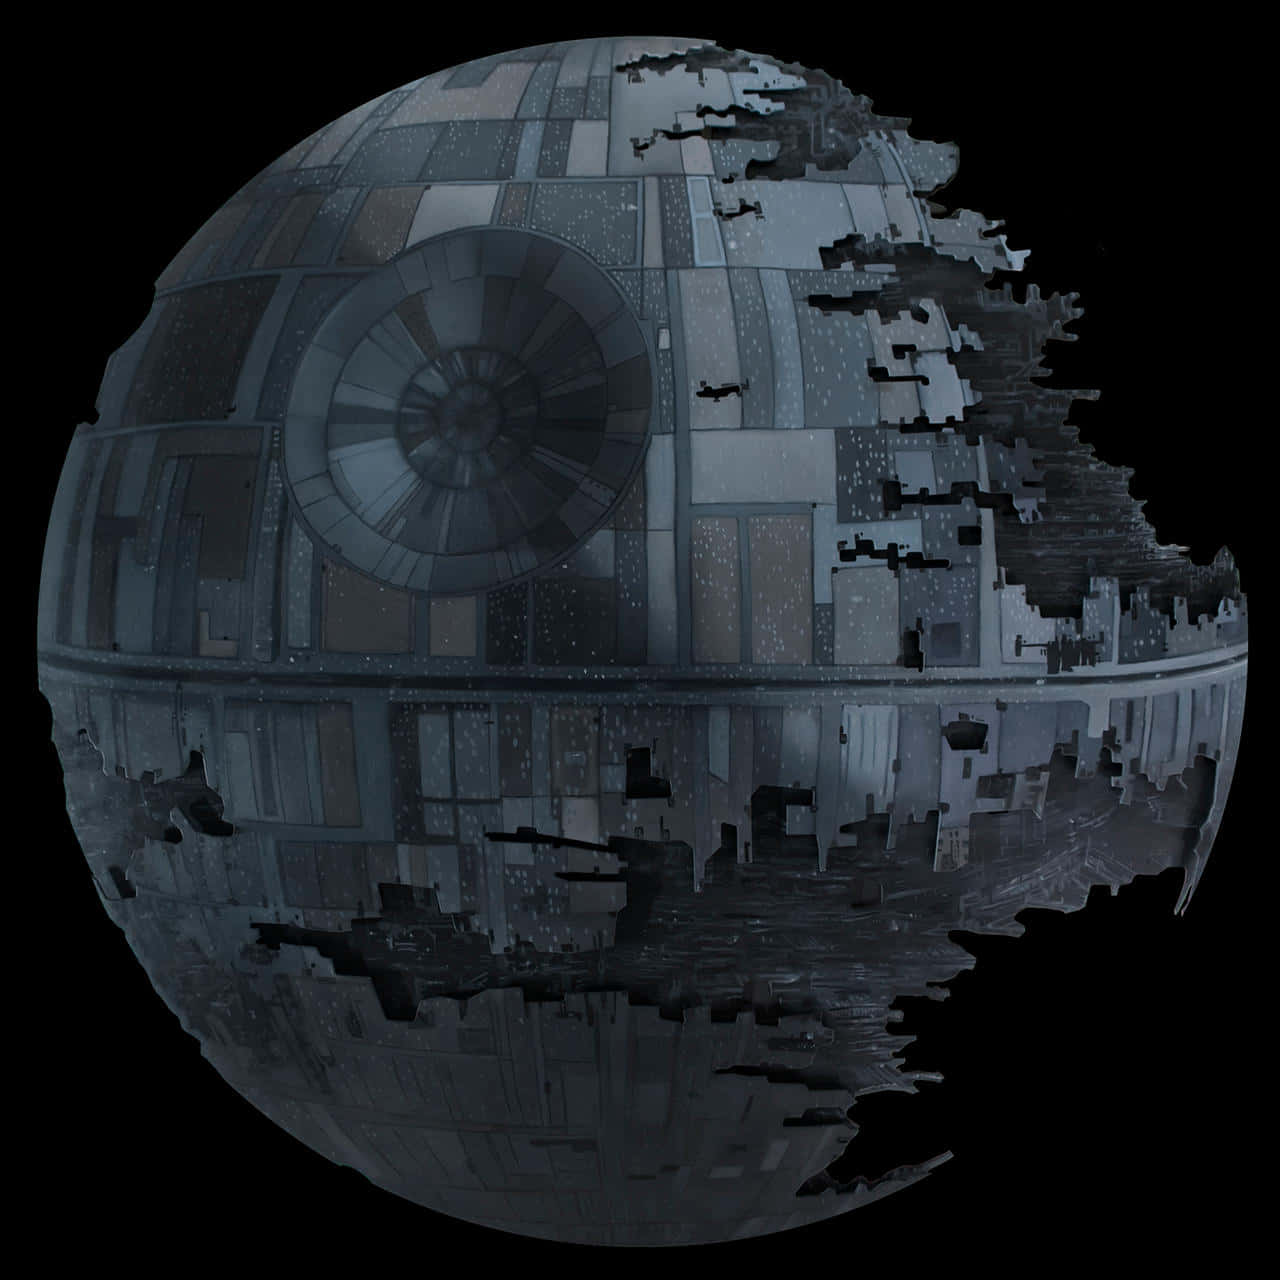 “The Unstoppable Force of the Death Star”